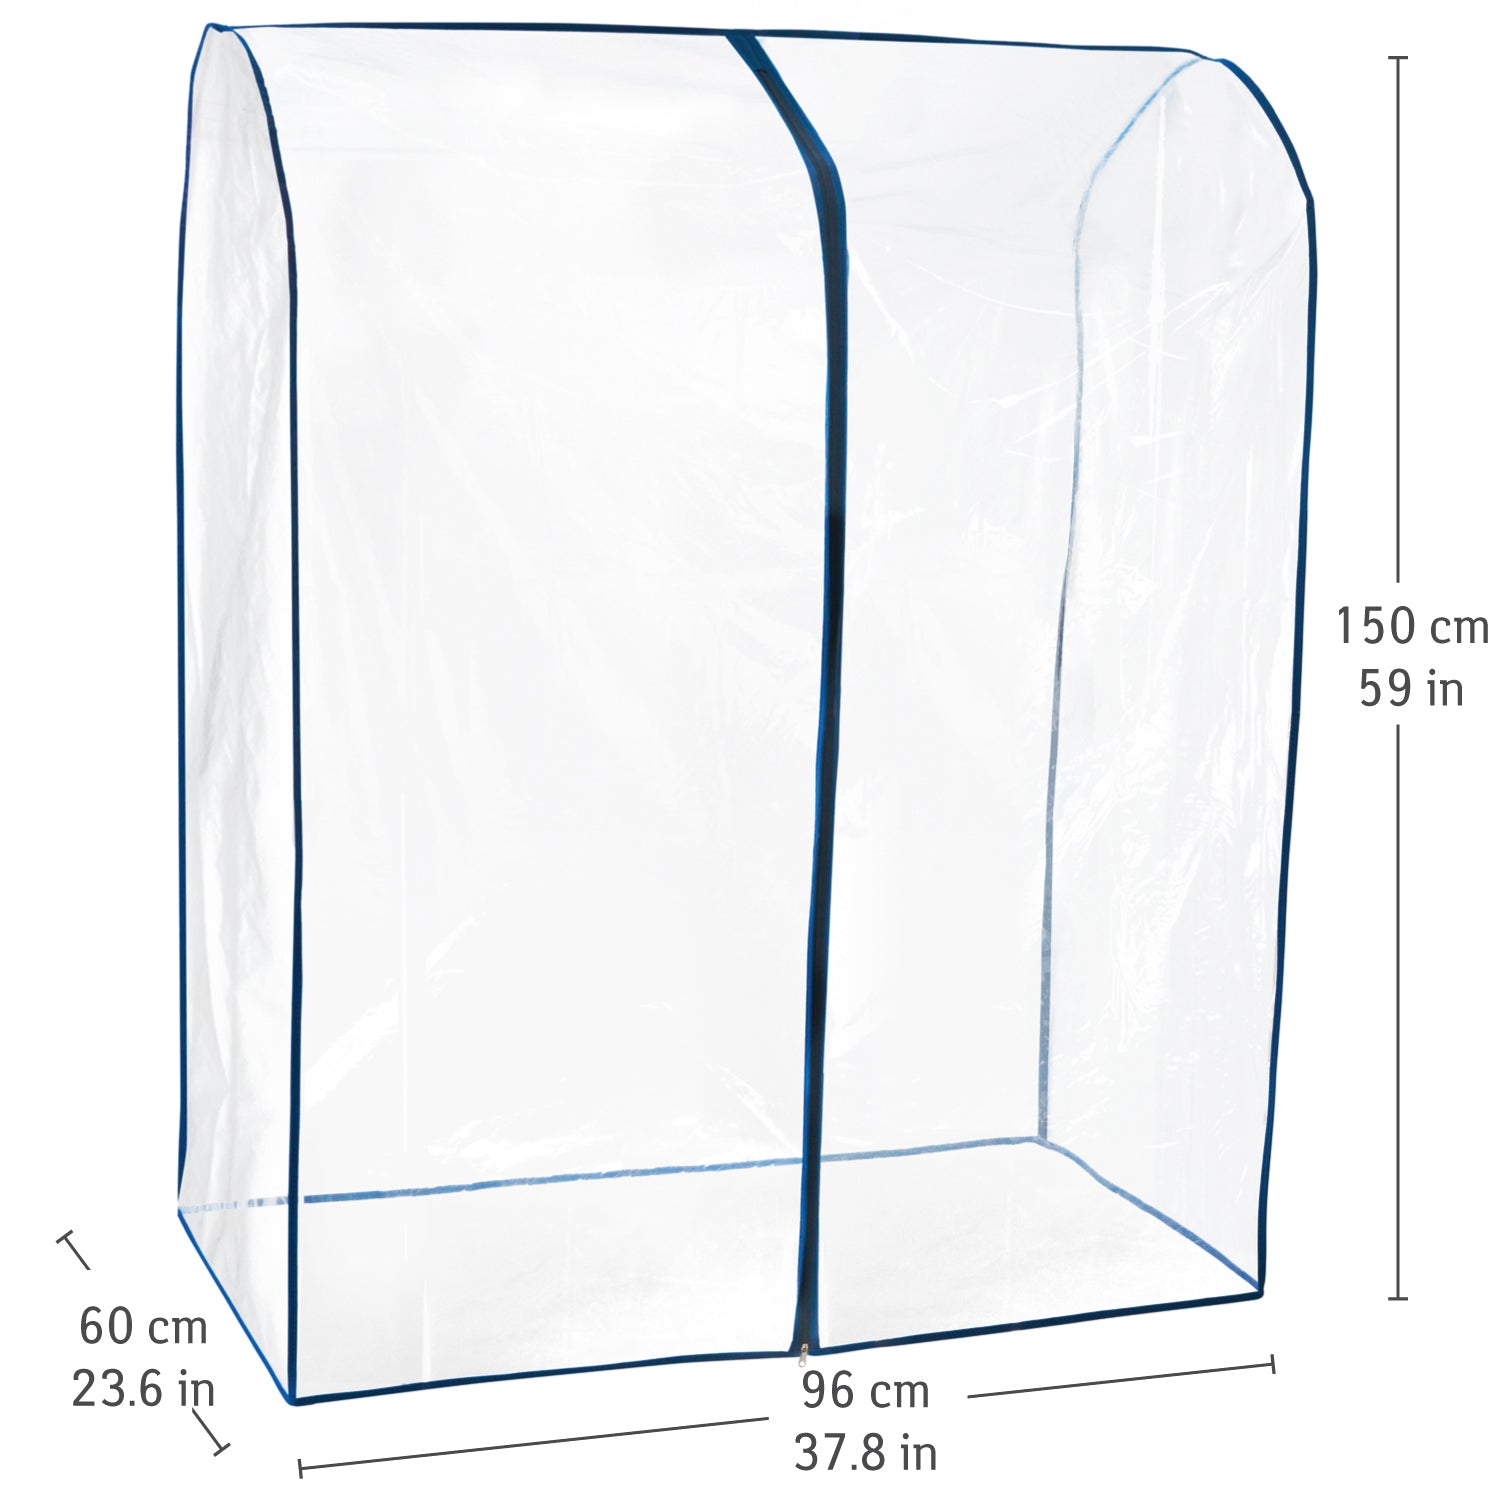 Cover for Clothes Rails keeps Clothes Free from Dust and Dirt, Garment Rack Protection Cover, Tatkraft Screen, 2